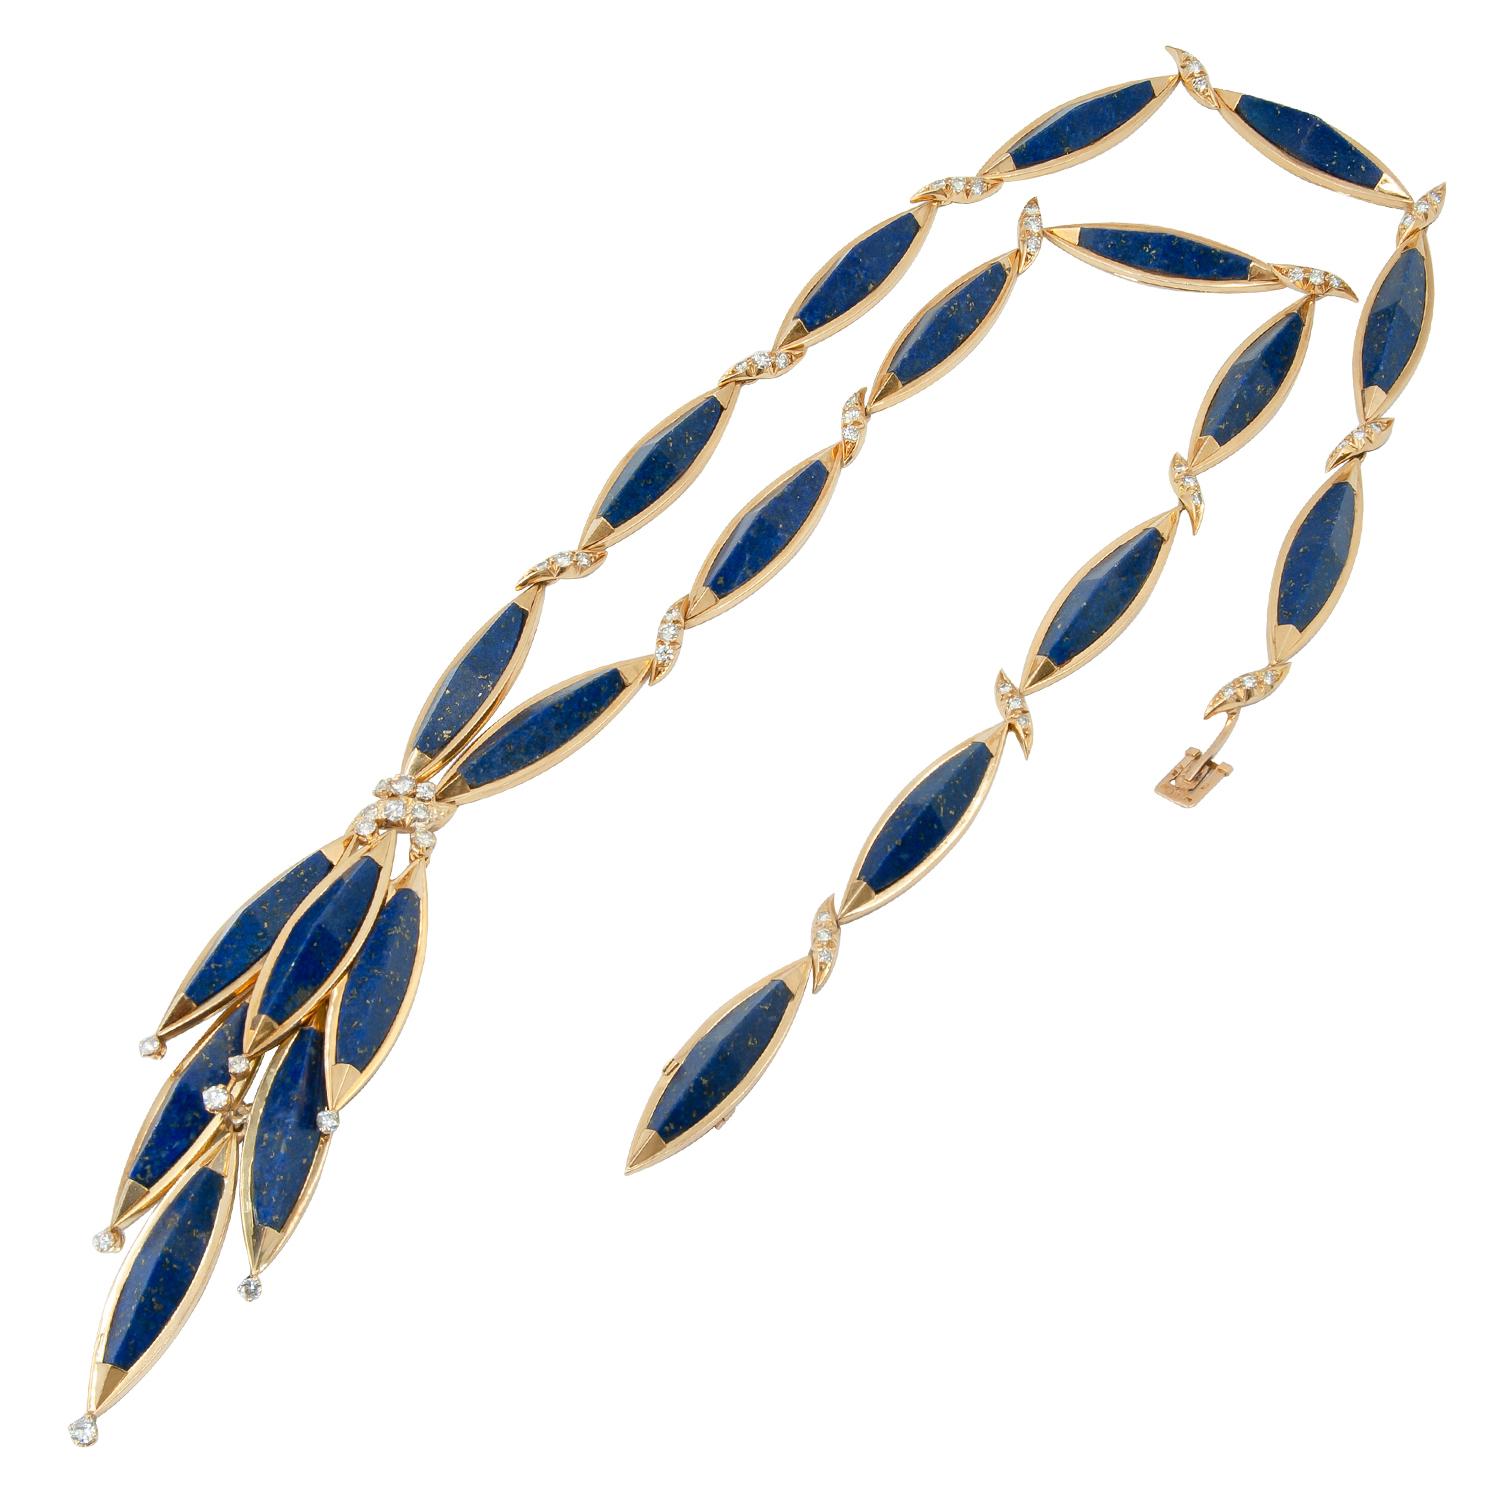 Diamond, Lapis Lazuli Gold Necklace
An 18k yellow gold long necklace, set with diamond, lapis lazuli.
measures approx. 18″ in length and pendant approx. 4″ in length
French hallmarks, circa 1970s